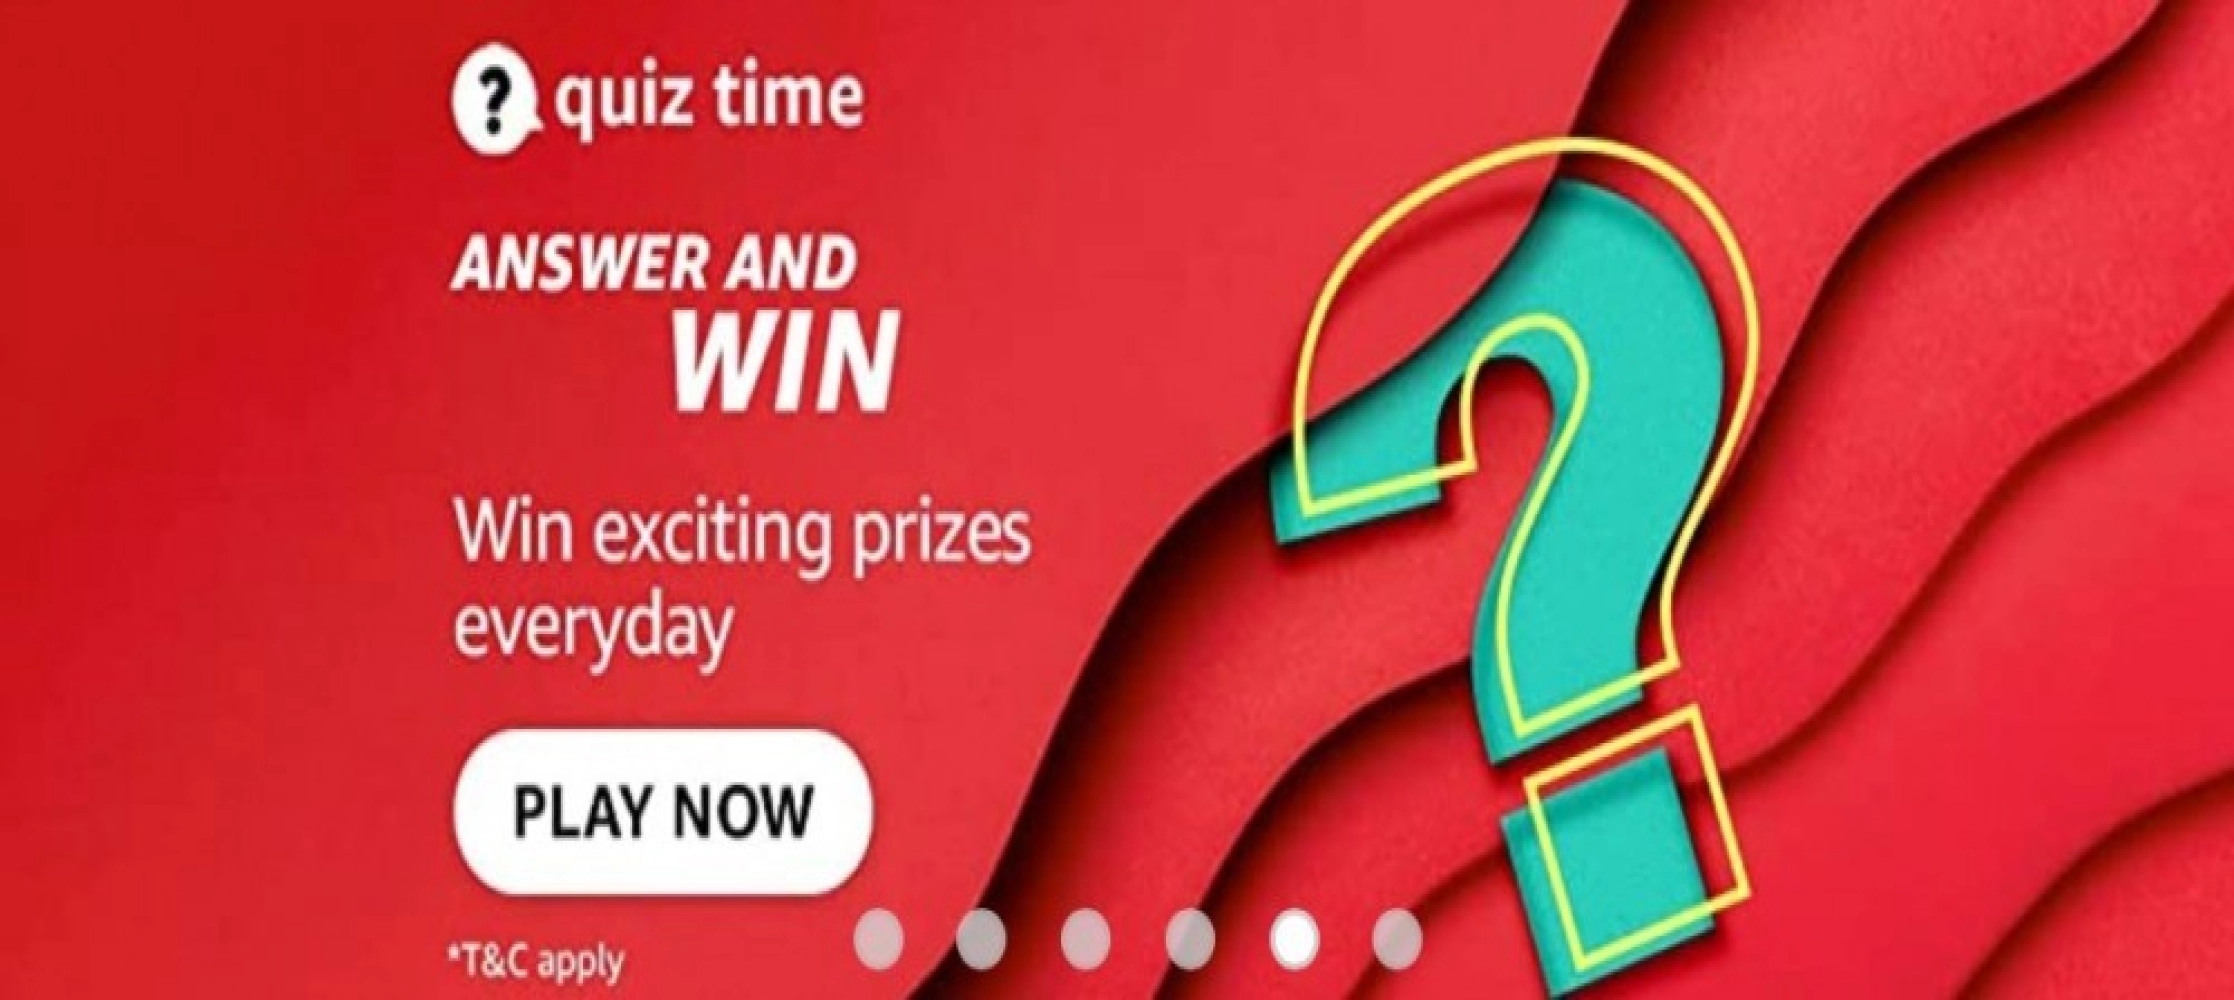 AMAZON QUIZ CONTEST: 8 MAY, 2022 - ANSWER TODAY FOR THE QUESTIONS AND GET A CHANCE TO WIN AMAZON PAY RS.20,000